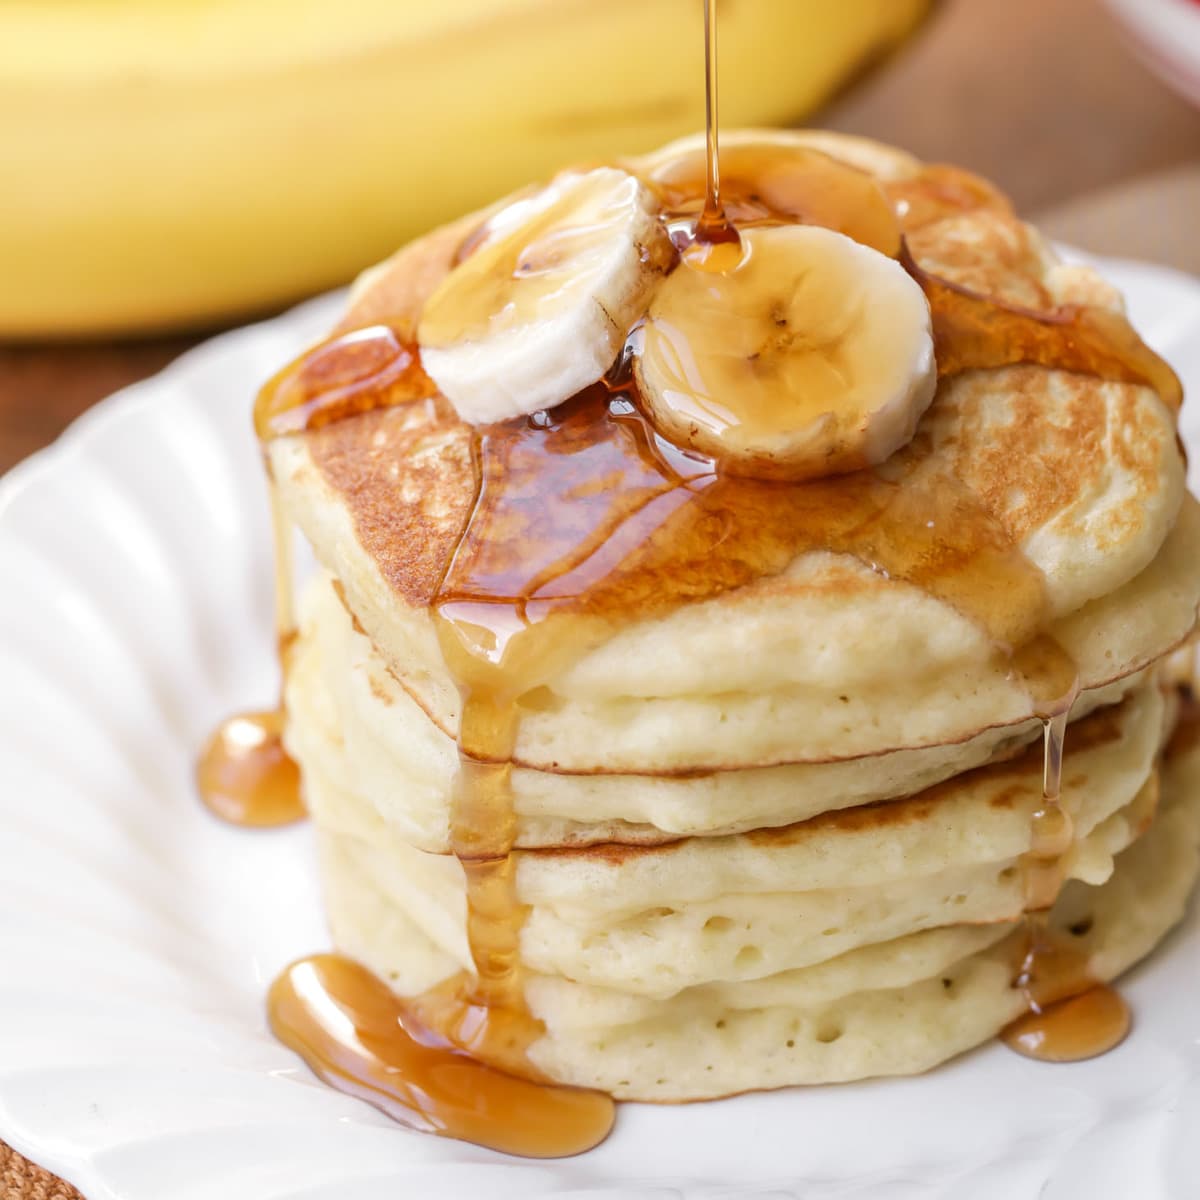 Pancake recipe variations - with bananas and syrup on top